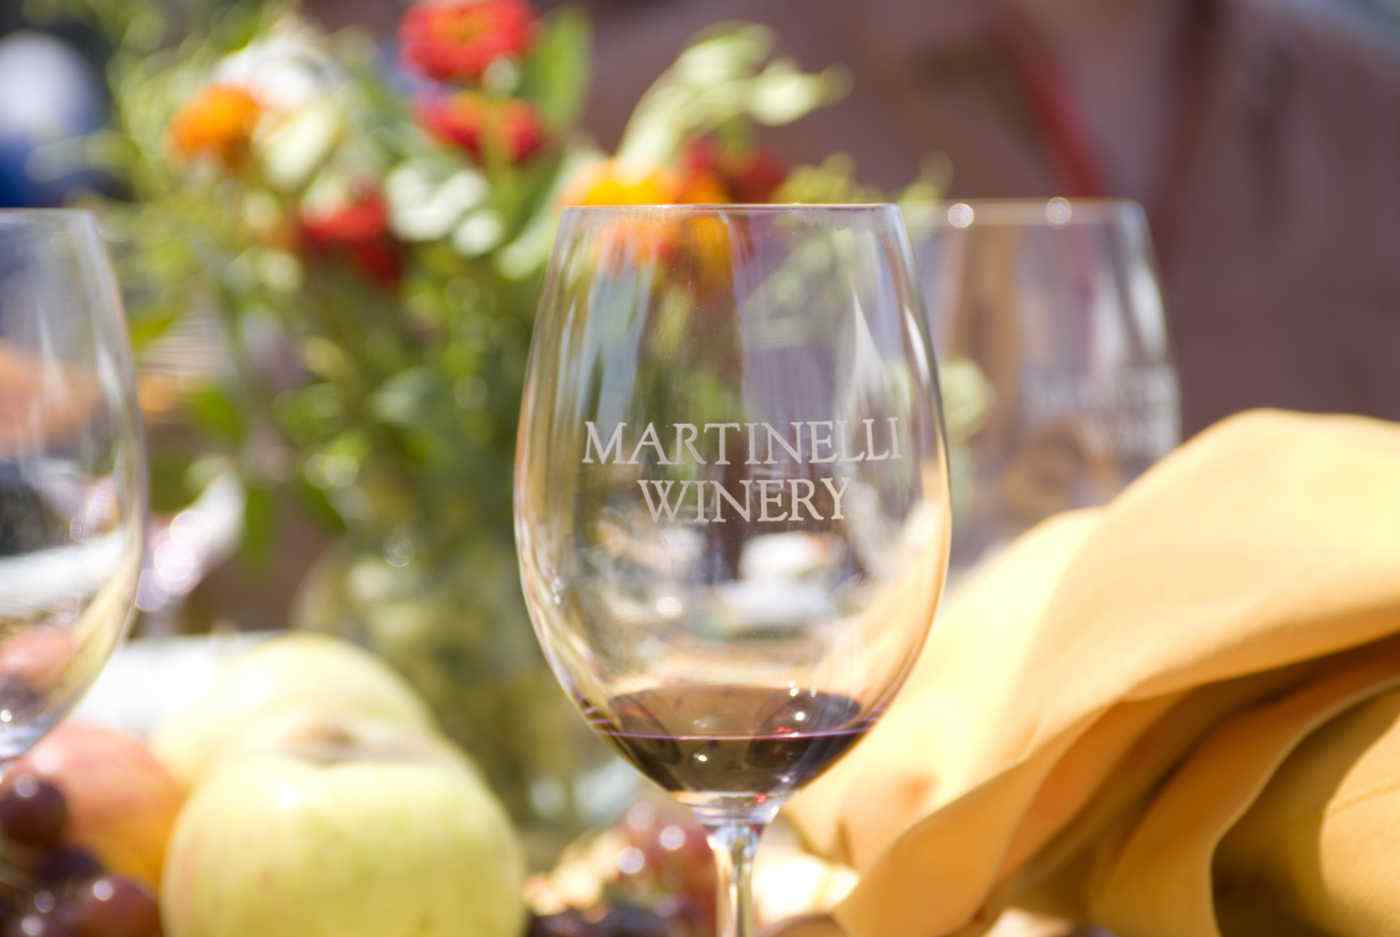 Martinelli winery labeled wine glass with fruit, napkin and flowers in background